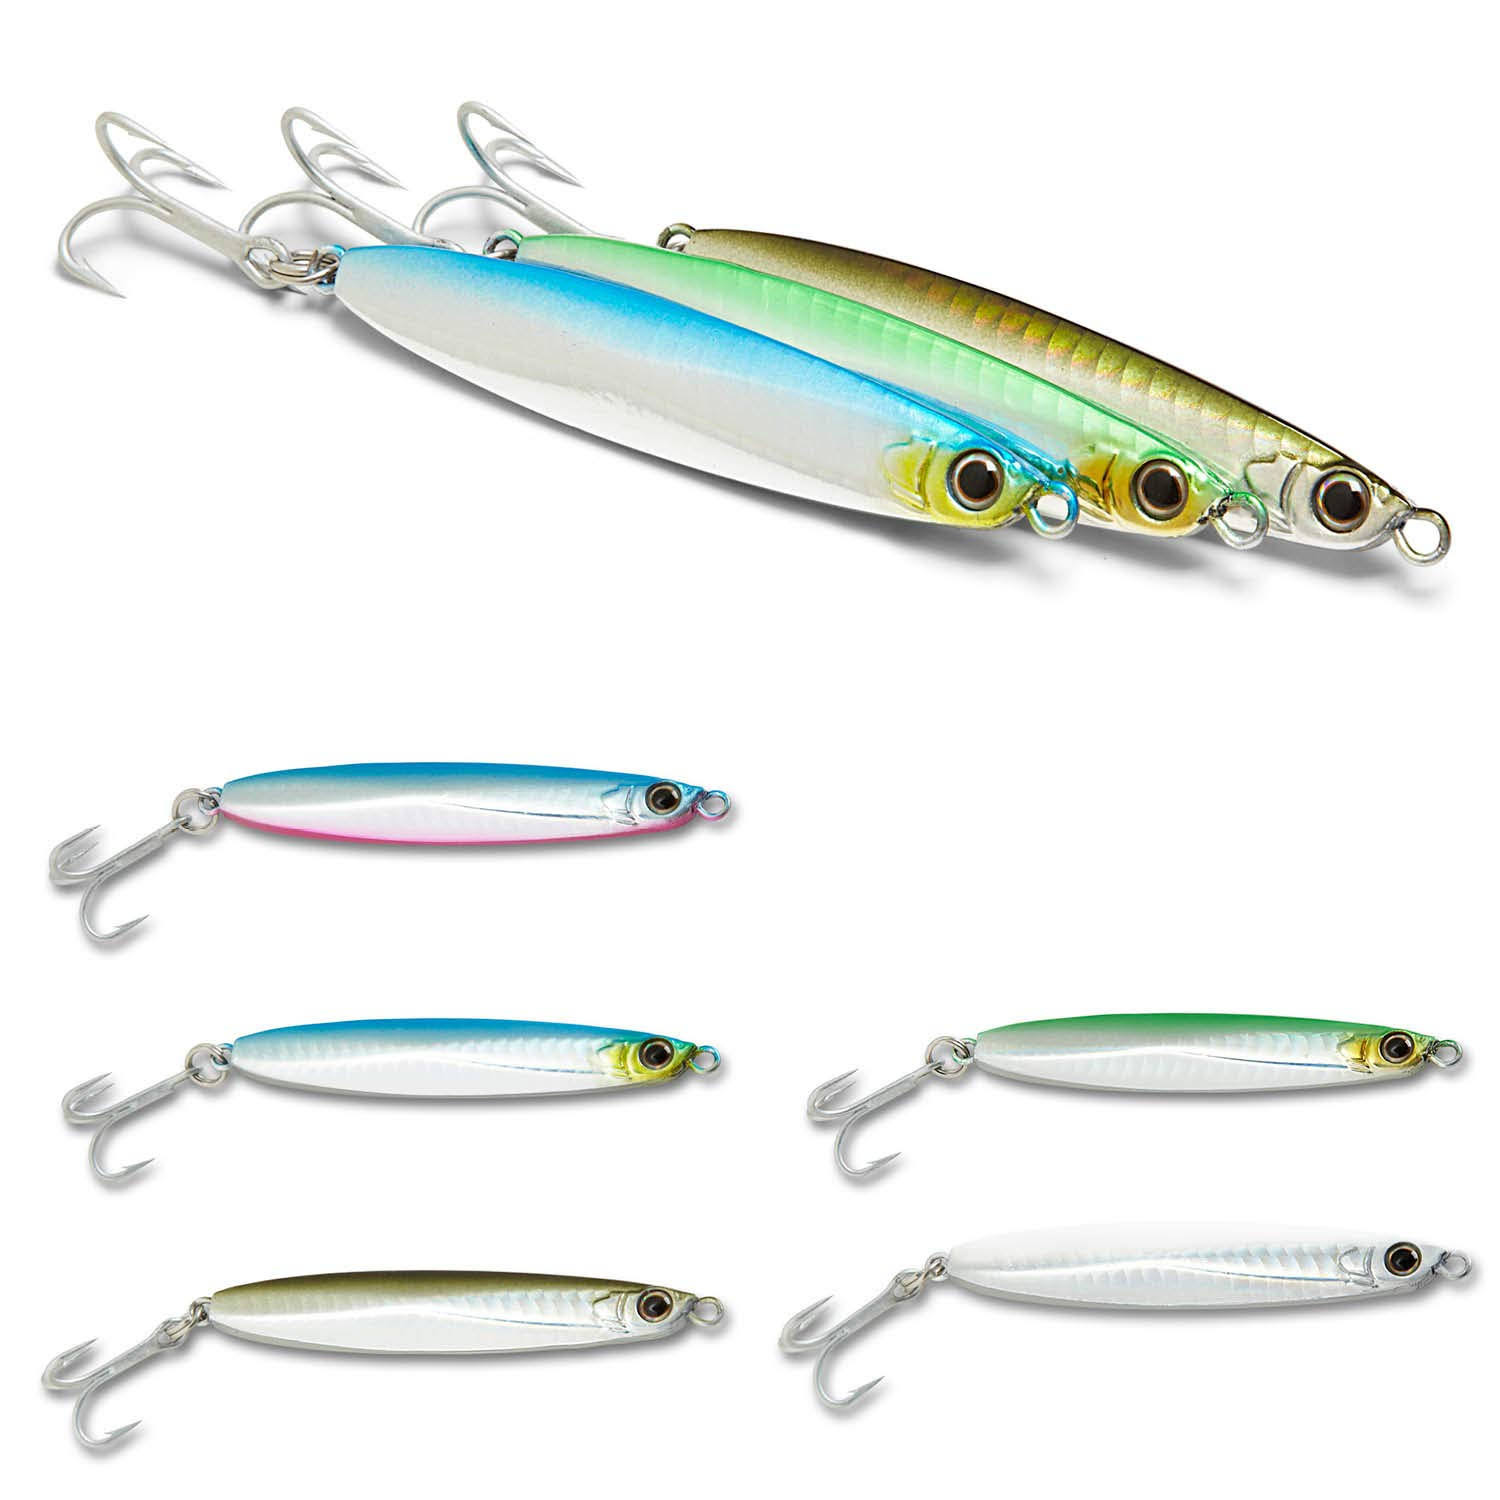 Shimano Coltsniper Jig Slow Fall Lure | Boating & Fishing | Best Price Guarantee | Free Shipping On All Orders | Delivery Guaranteed